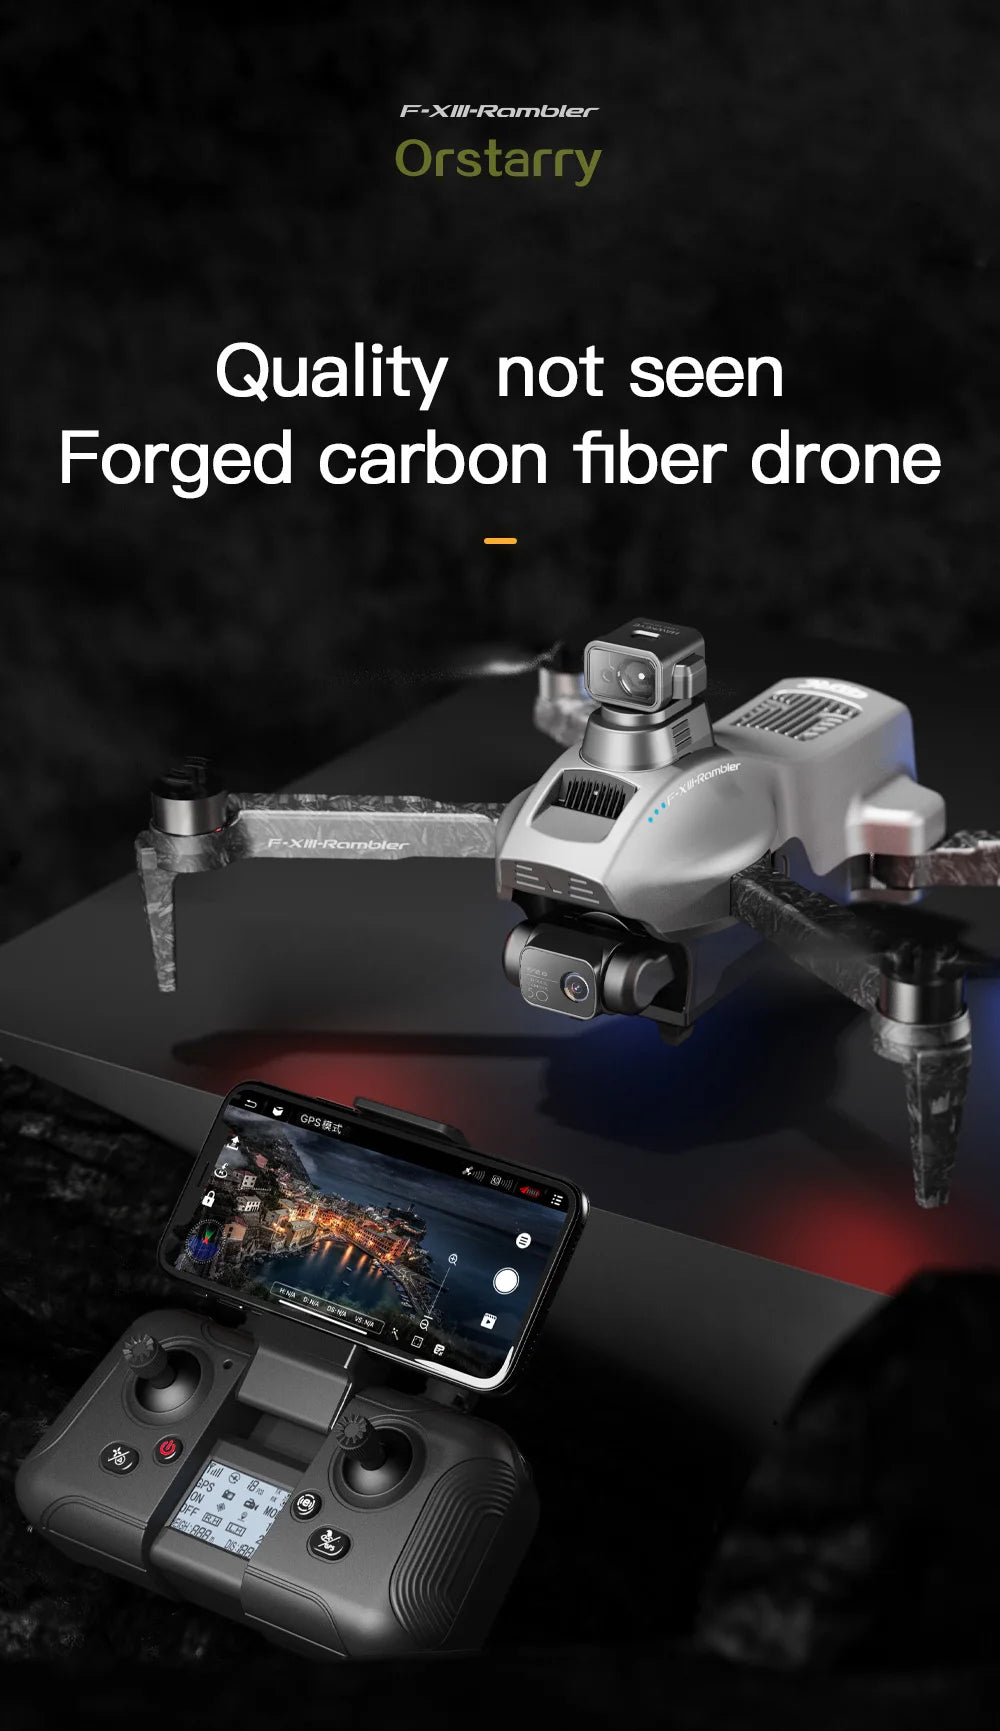 F13 Drone, F-XIII-Rambler Orstarry Quality not seen Forged carbon fiber